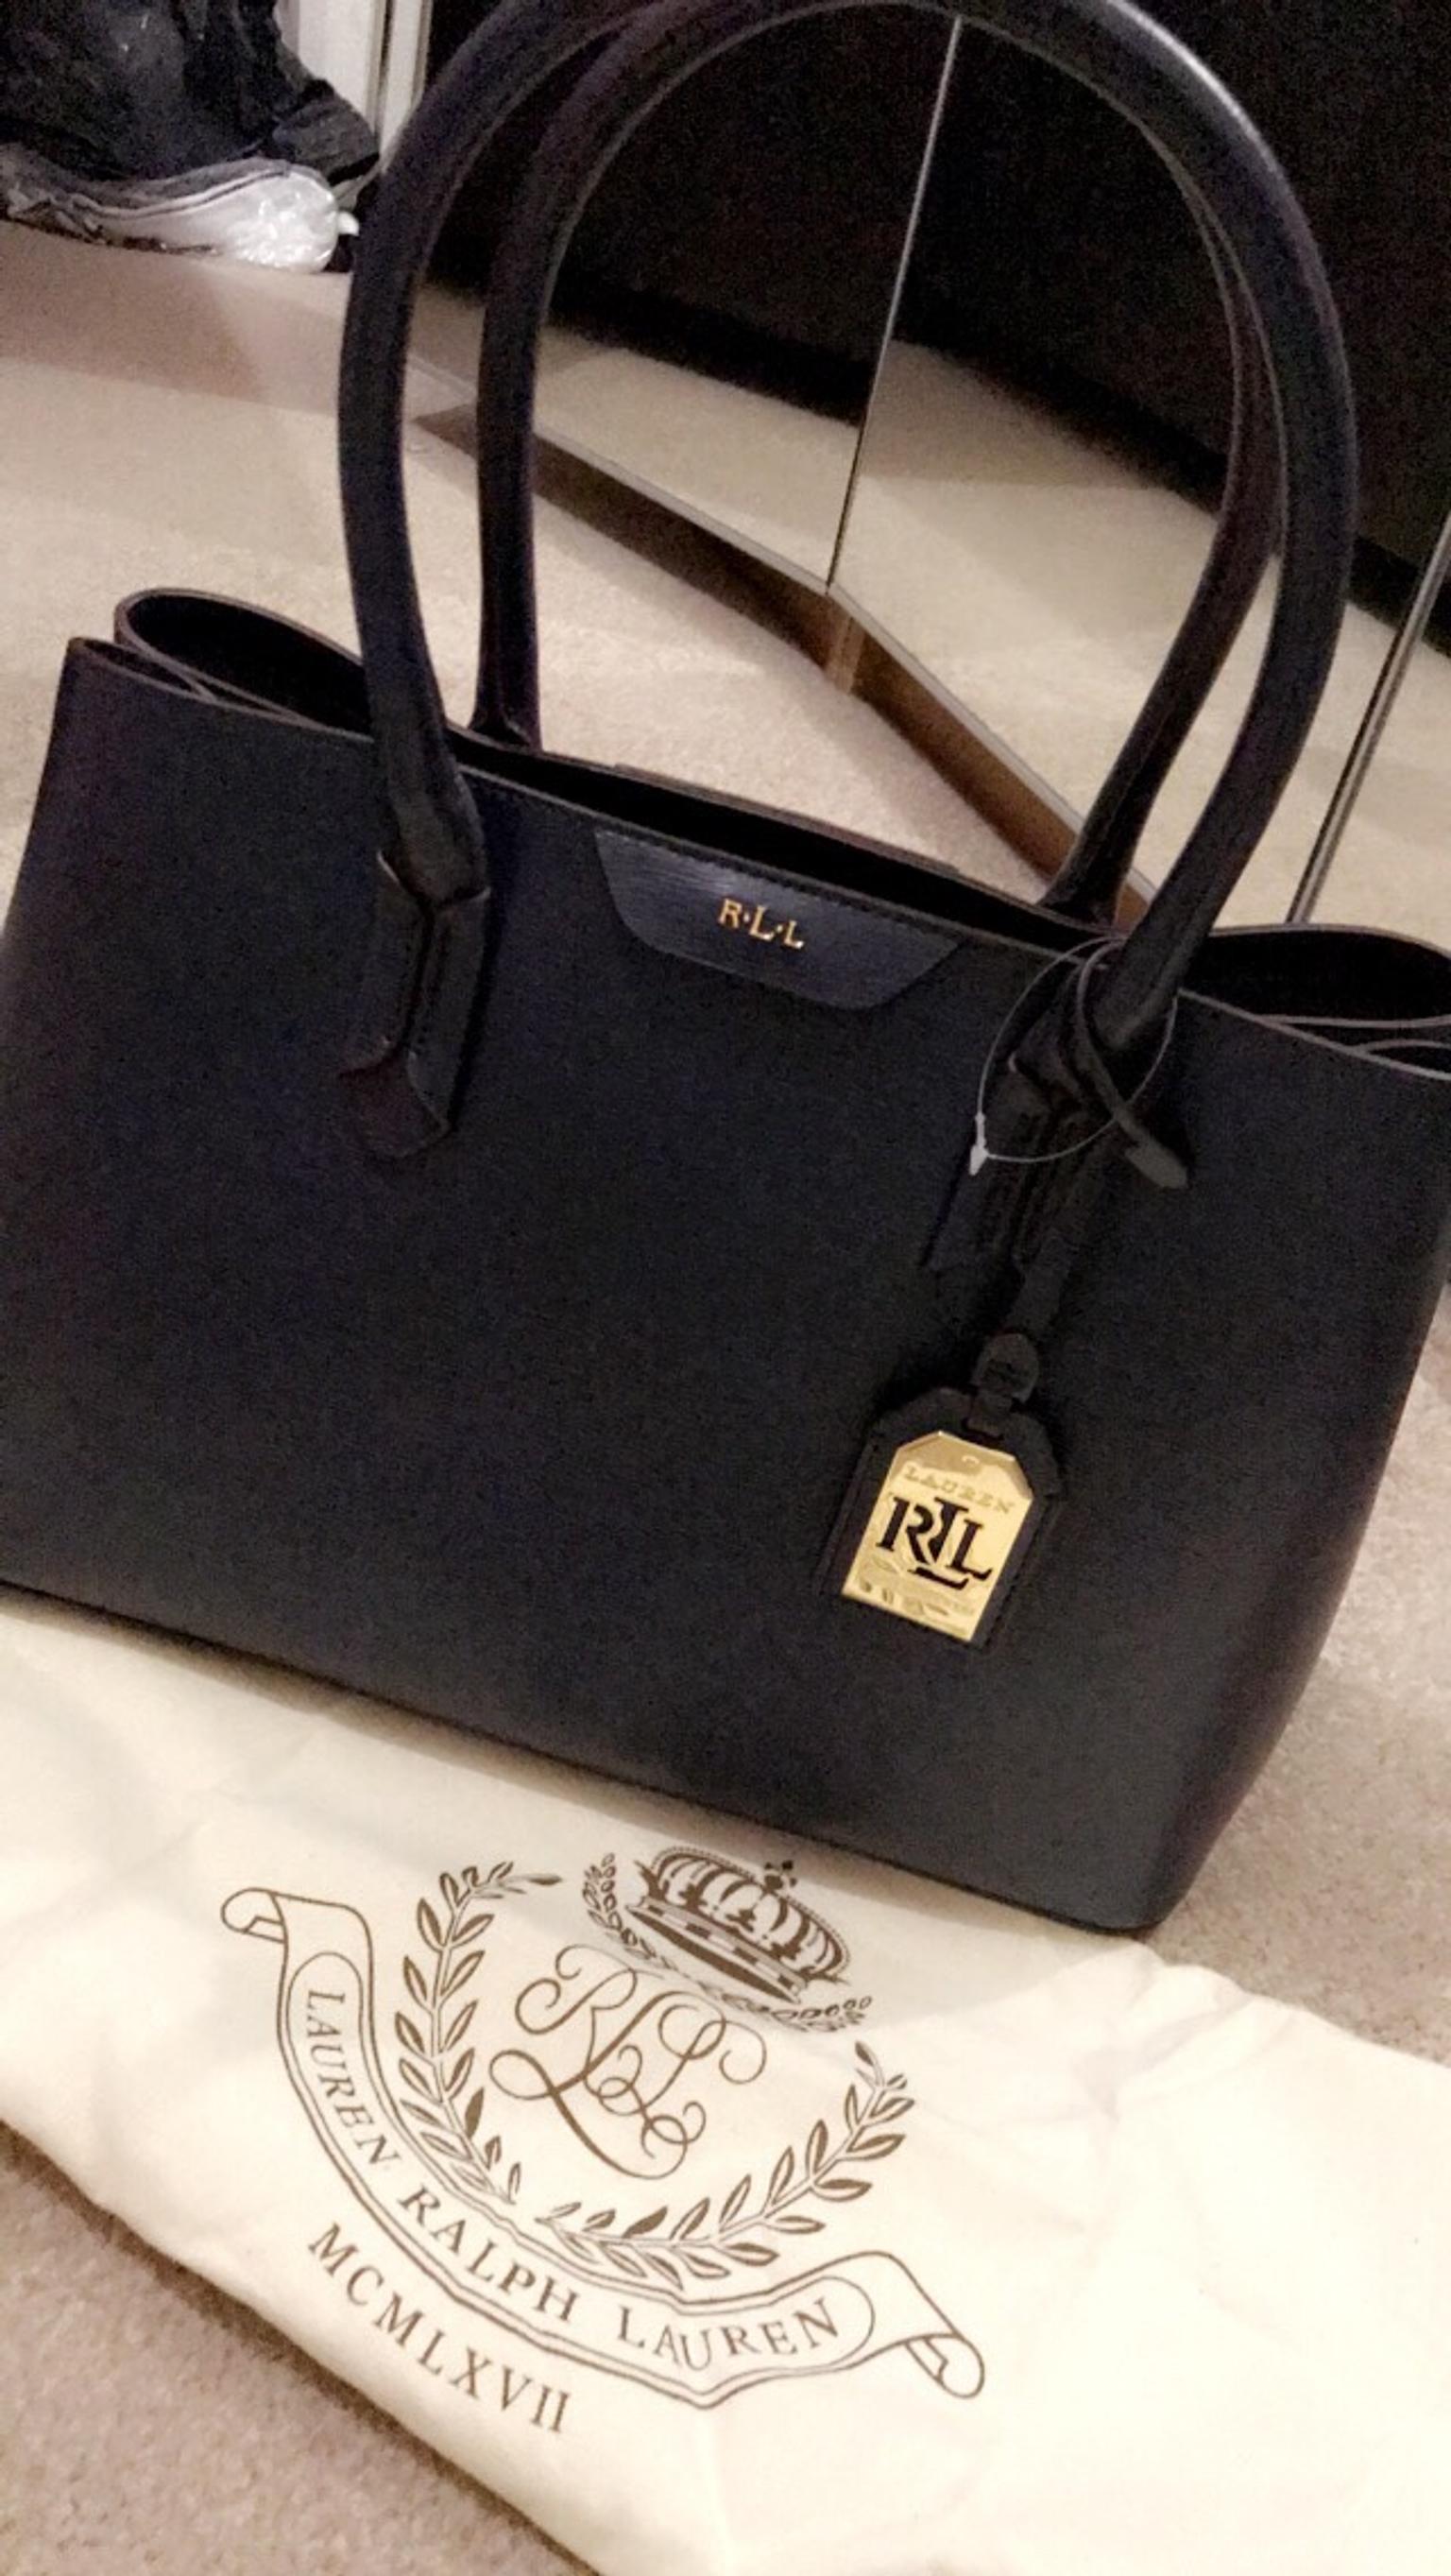 rll tote